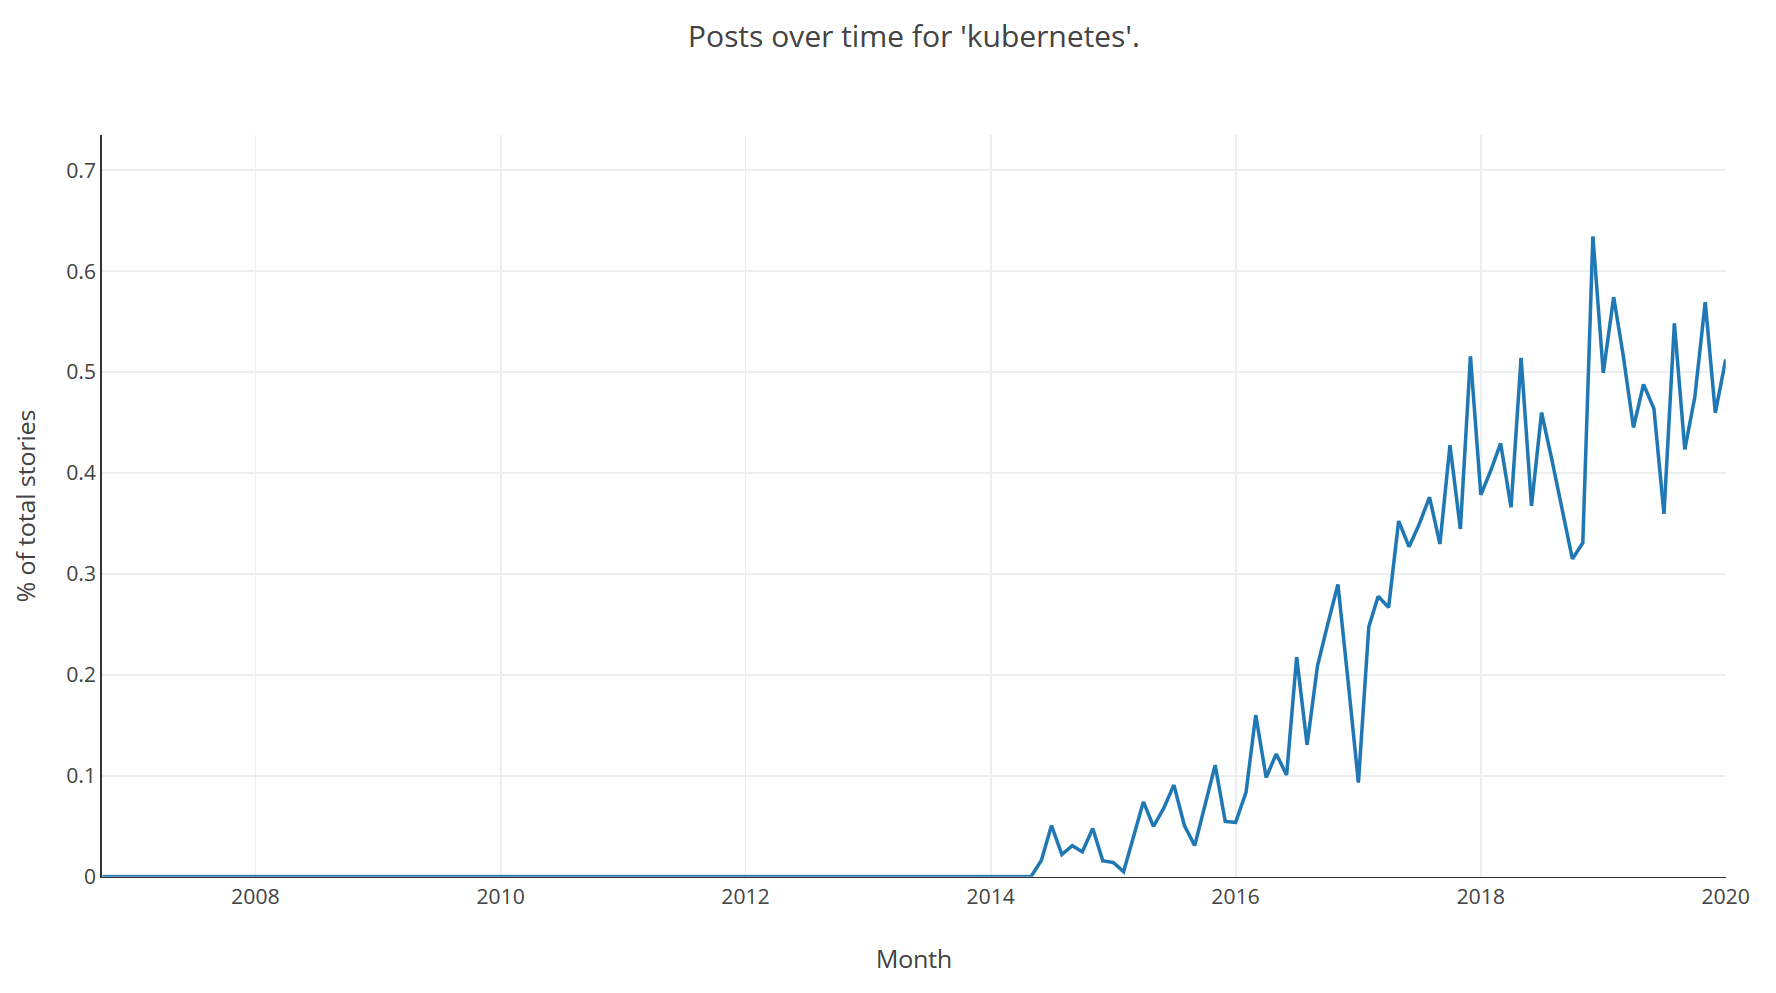 An increasing trend starting after 2014